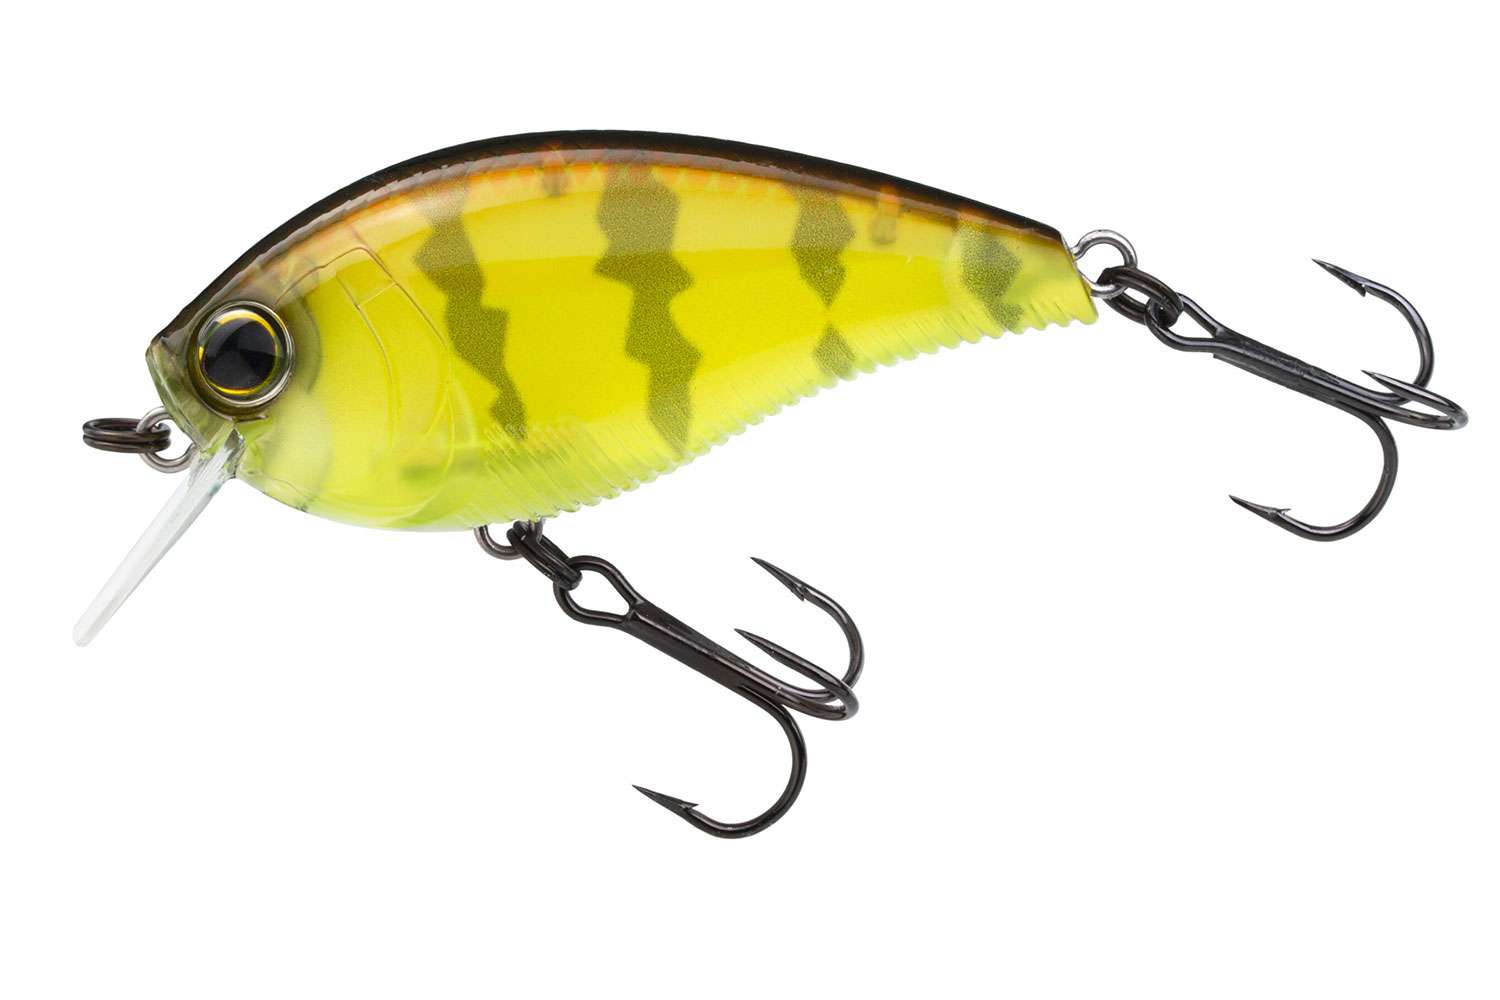 <p><b>Yo-Zuri 1.5 Crank Squarebill</b></p>
The new 1.5 Crank Squarebill is the perfect addition to any power-fishing enthusiast tackle box. This bait is 1/2 ounce and features a depth range between 3 and 5 feet, and mimics the perfect baitfish erratic swimming action triggering every fish it runs in front of into striking. Offered in a dozen realistic internally painted patterns to match every forage type across the country, the 1.5 Crank Squarebill also comes with two No. 4 round-bend treble hooks with high quality split rings.<br>
<p><b>MSRP: $7.99</b></p>
<a href=